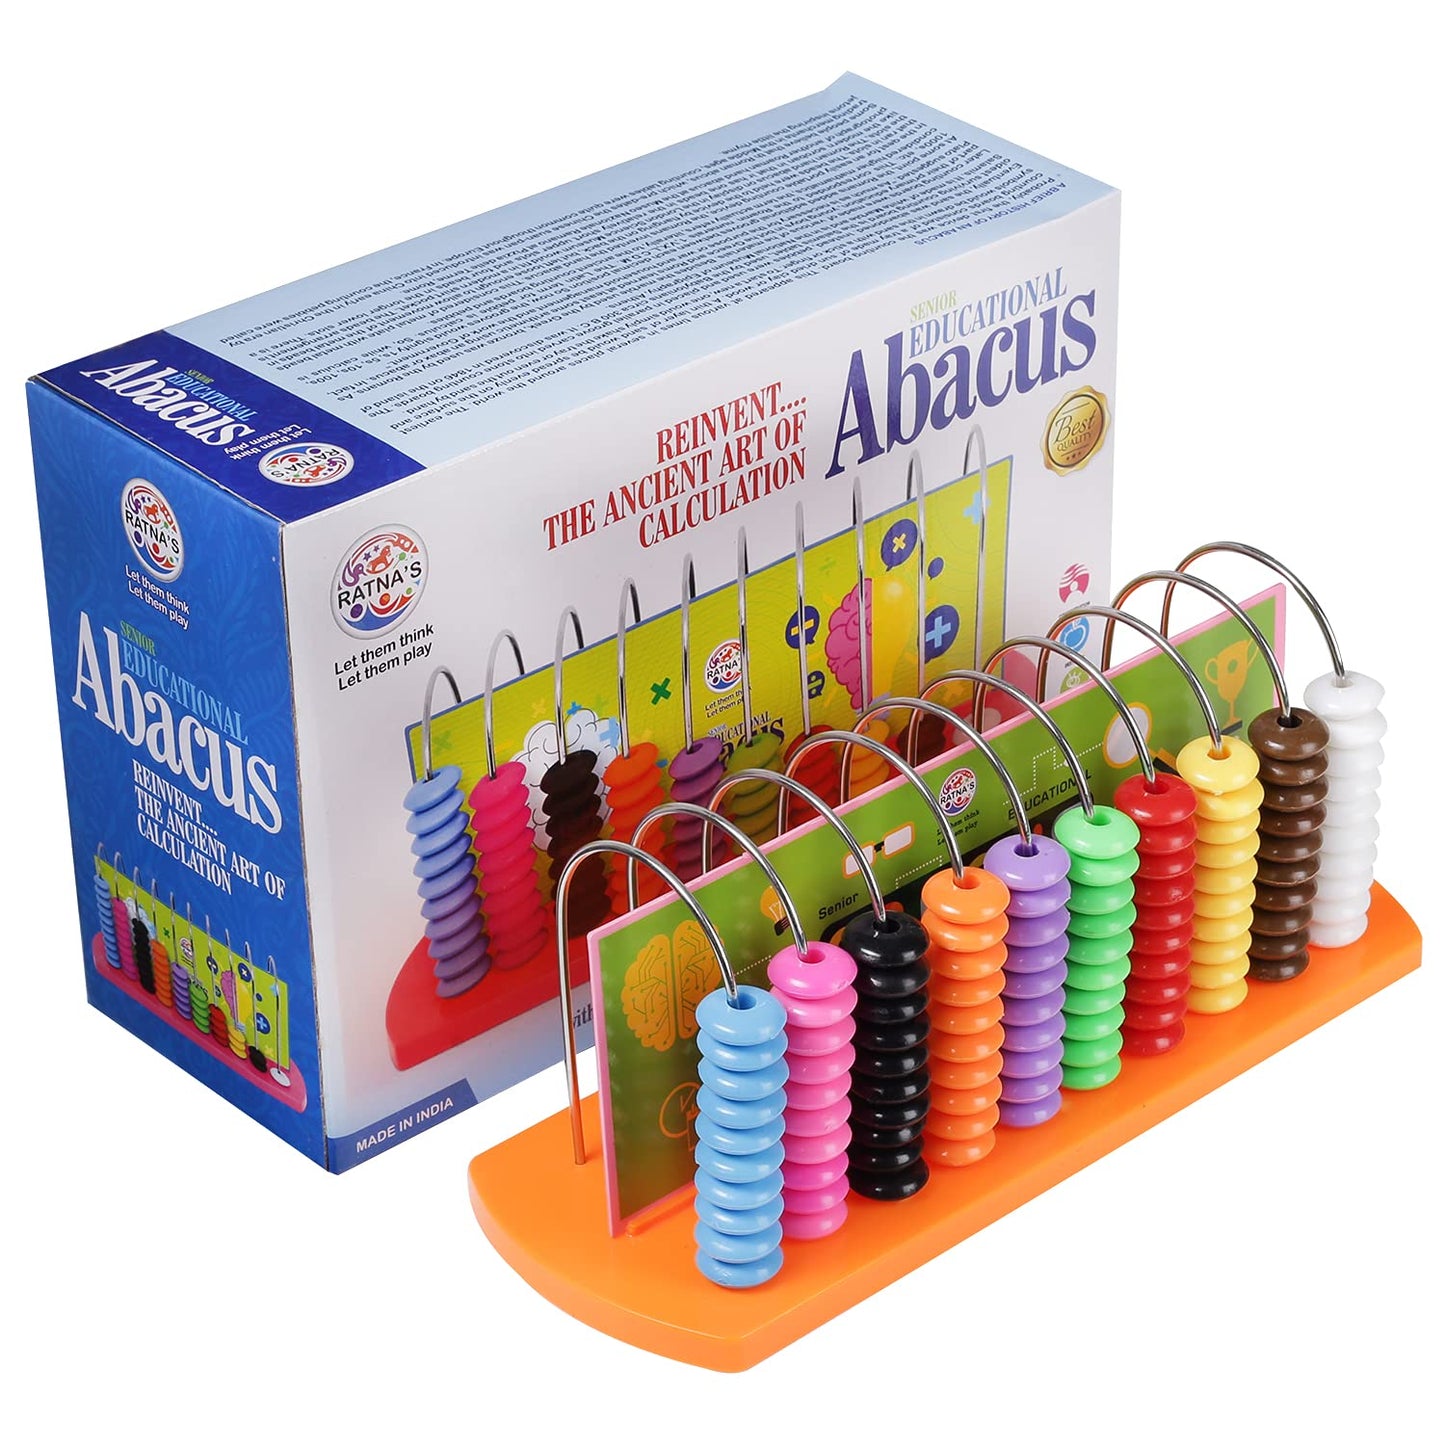 Ratna's Educational Abacus Senior for Kids to Count, Add & Subtract with Colourful Beads